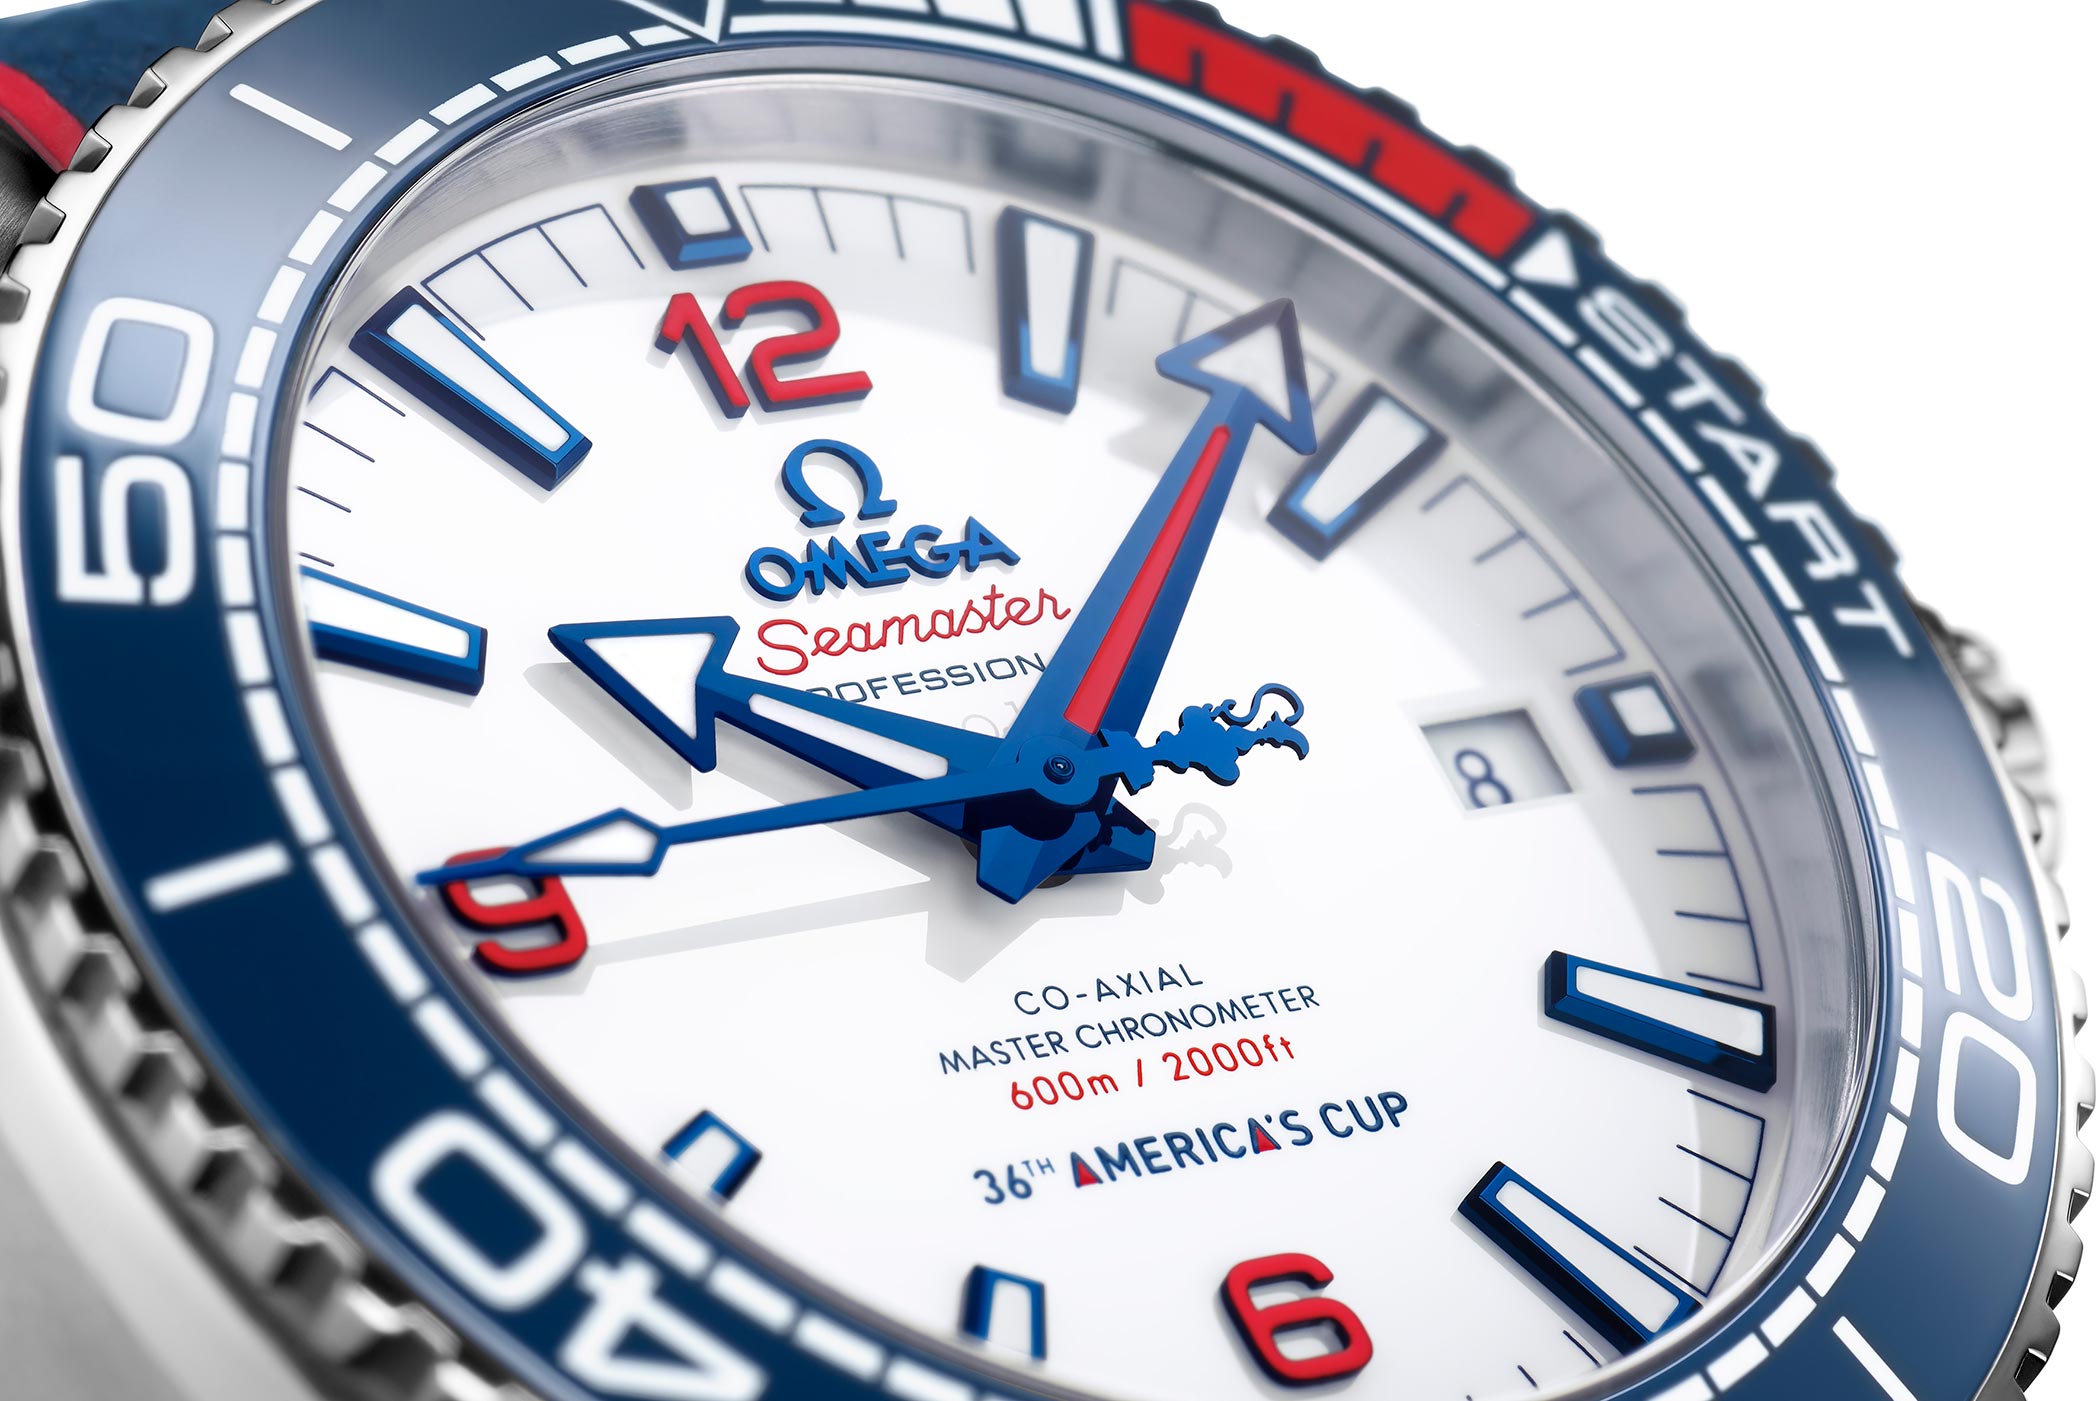 OMEGA Seamaster Planet Ocean 36th America’s Cup Limited Edition